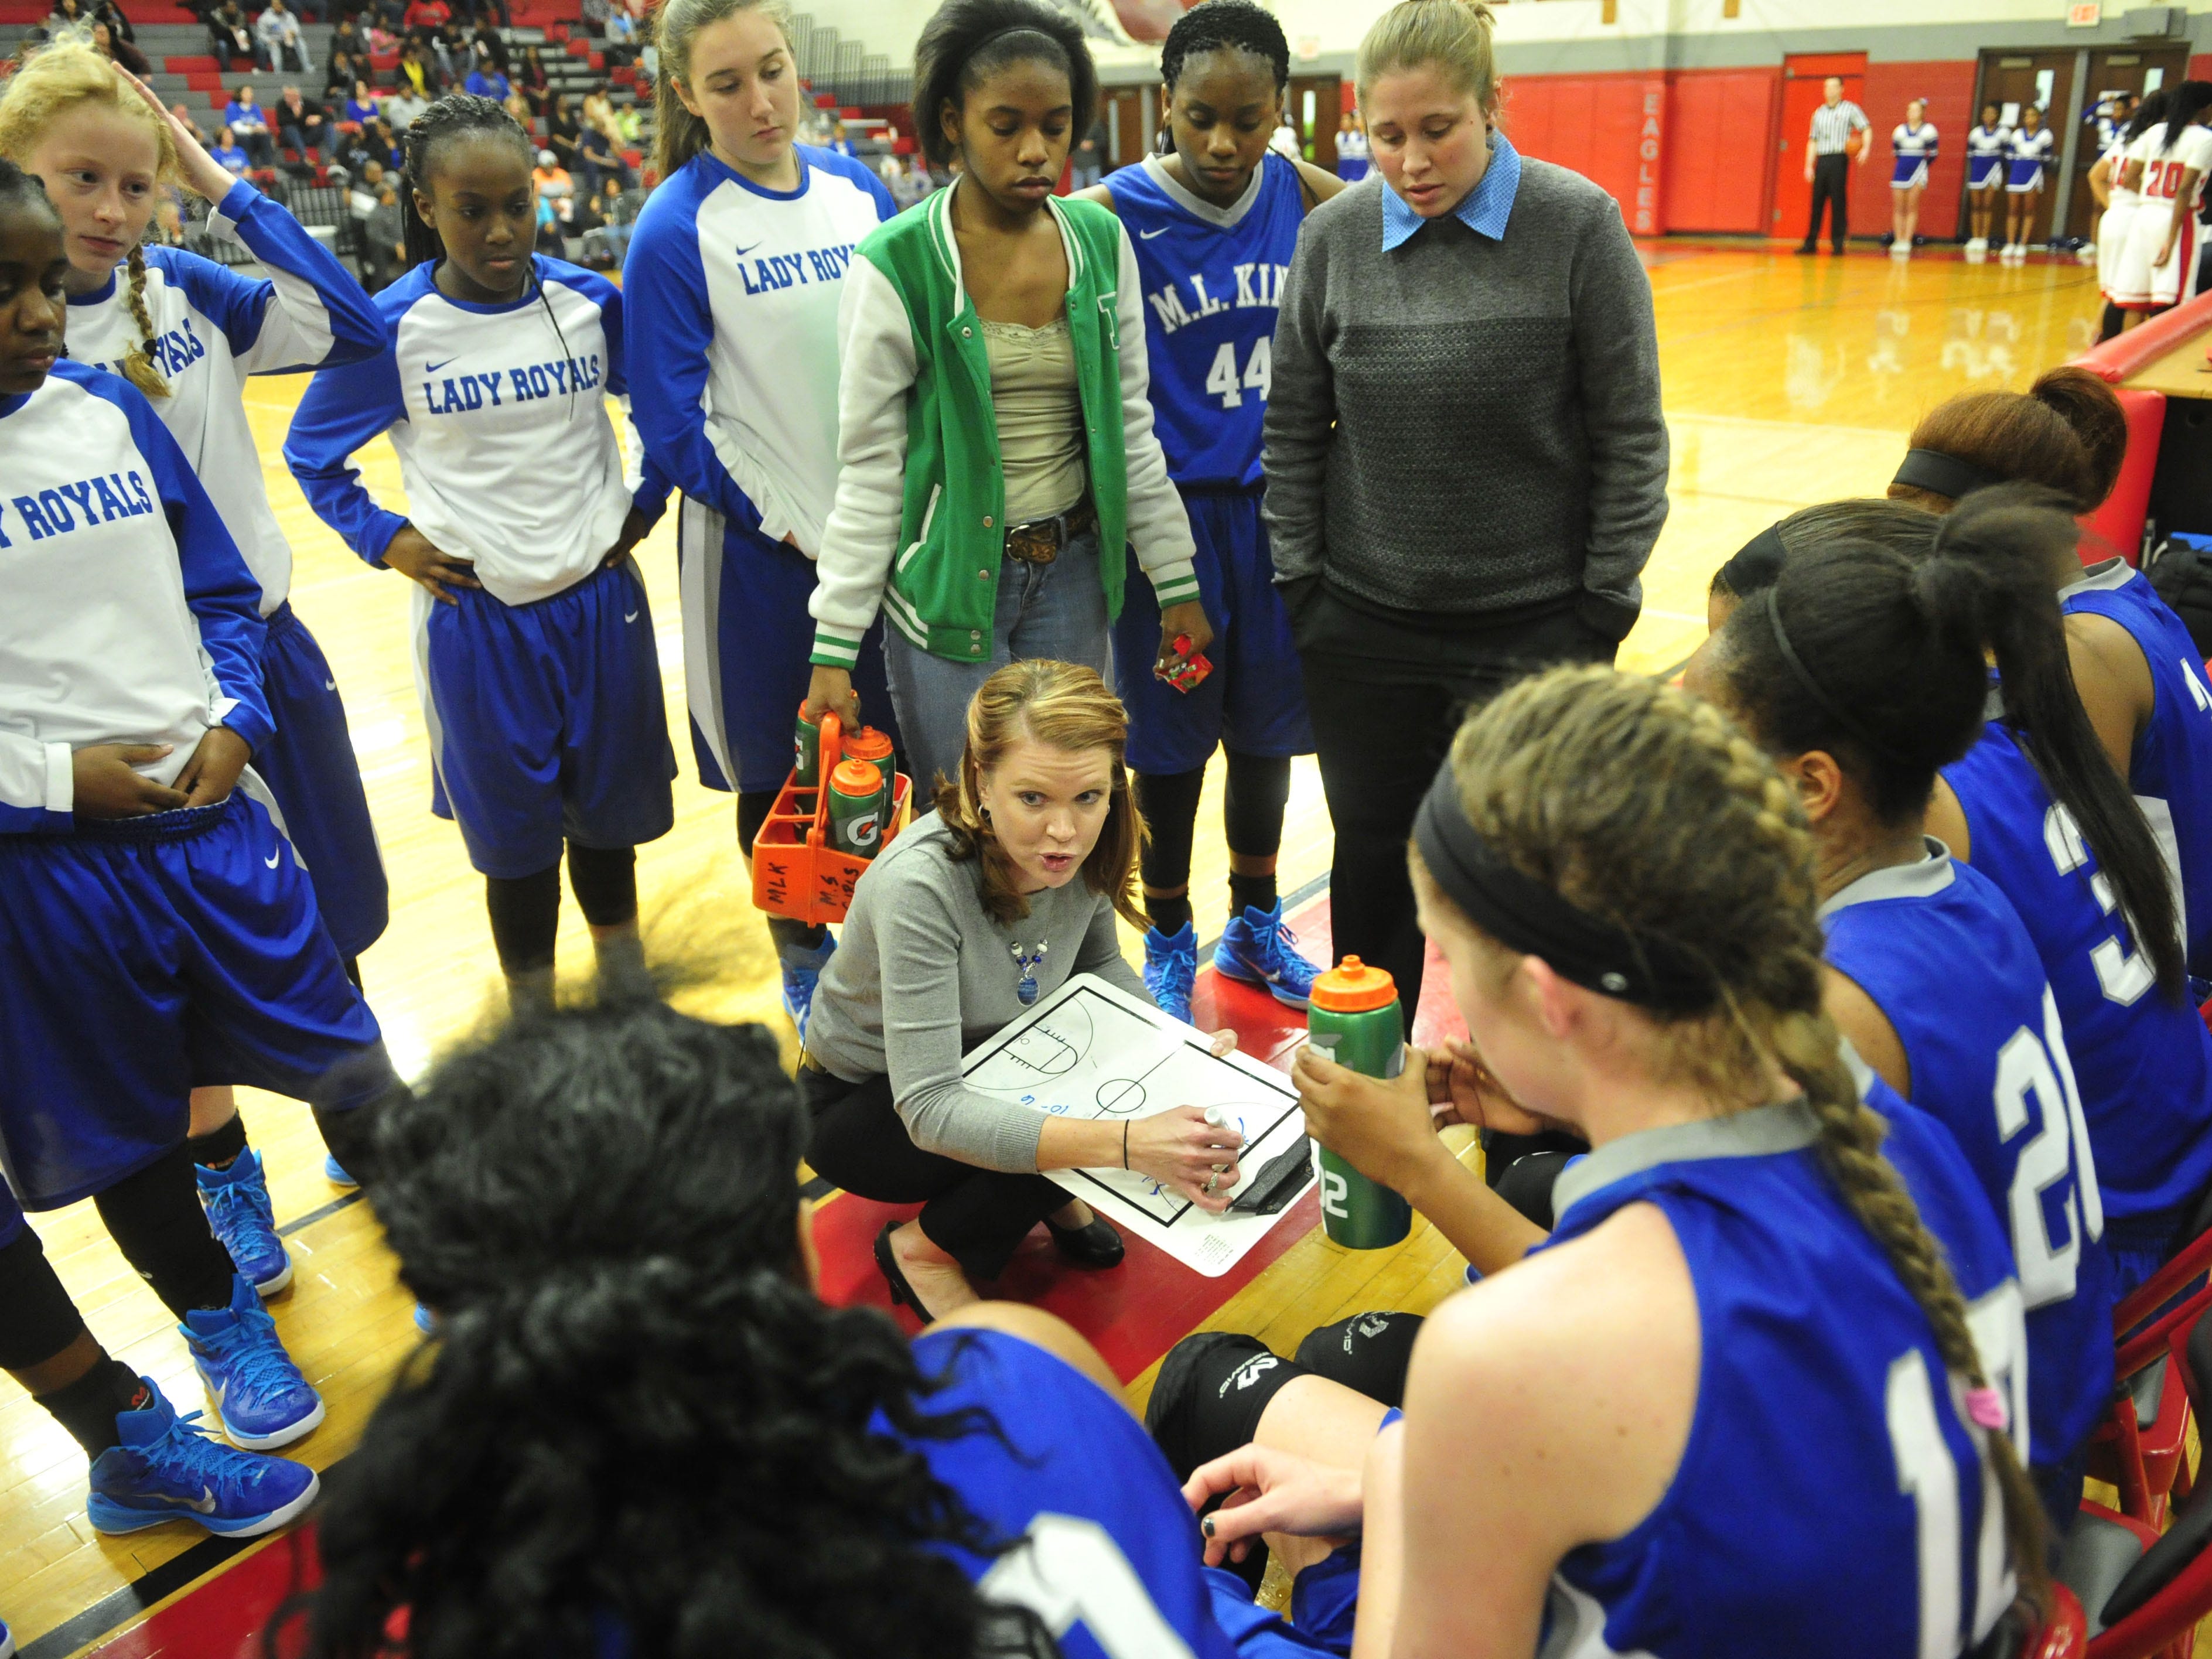 MLK coach Lindy Brown King led her team to the Class AA state title.